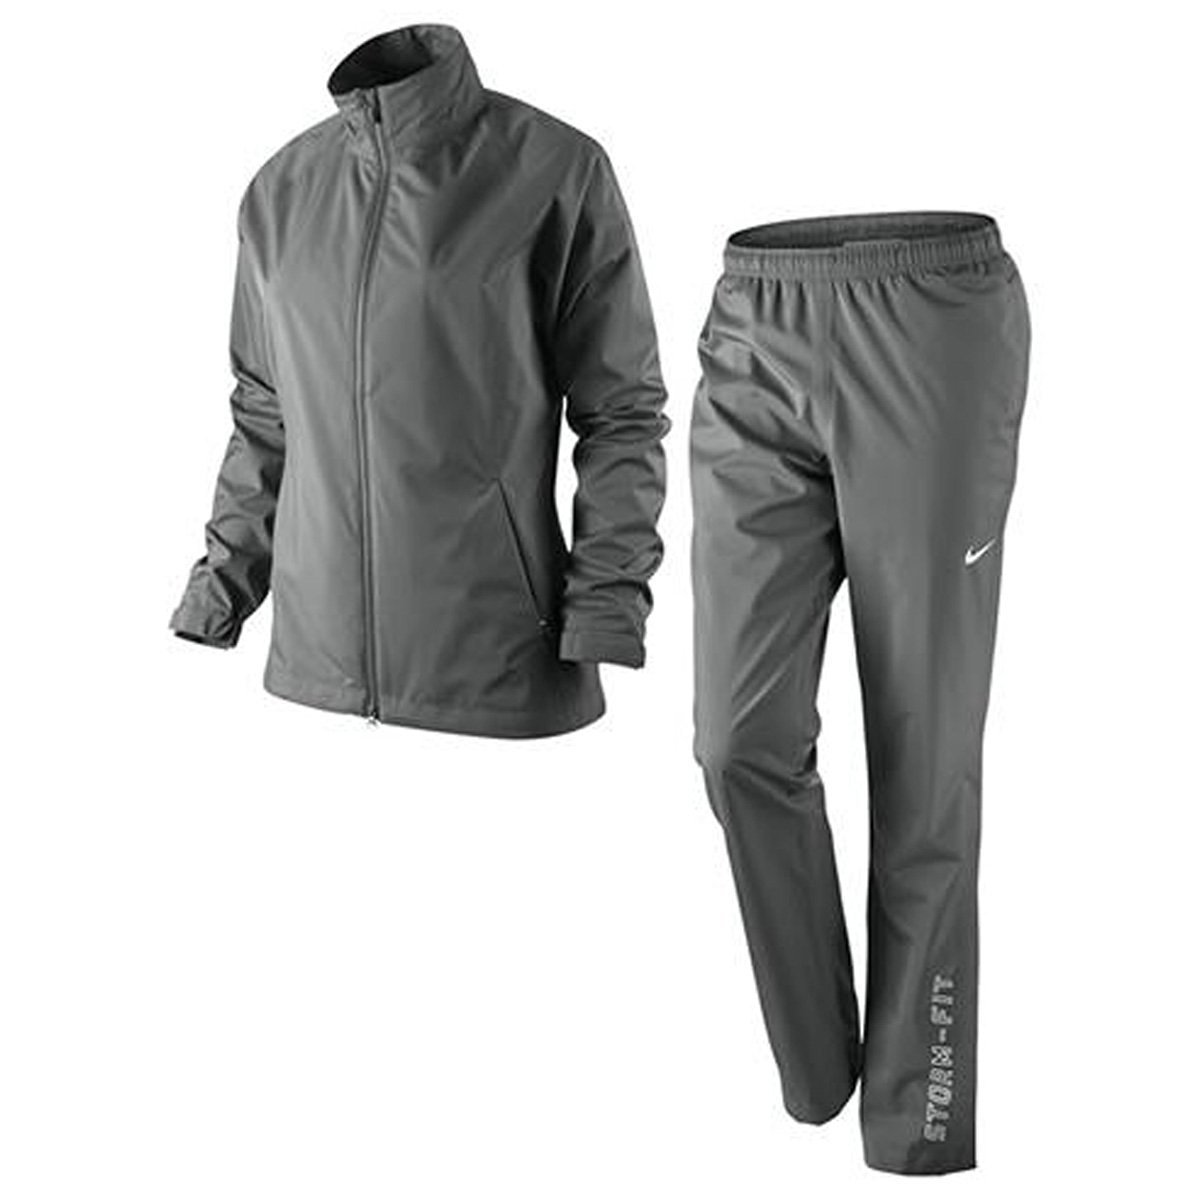 nike rain suits for golf